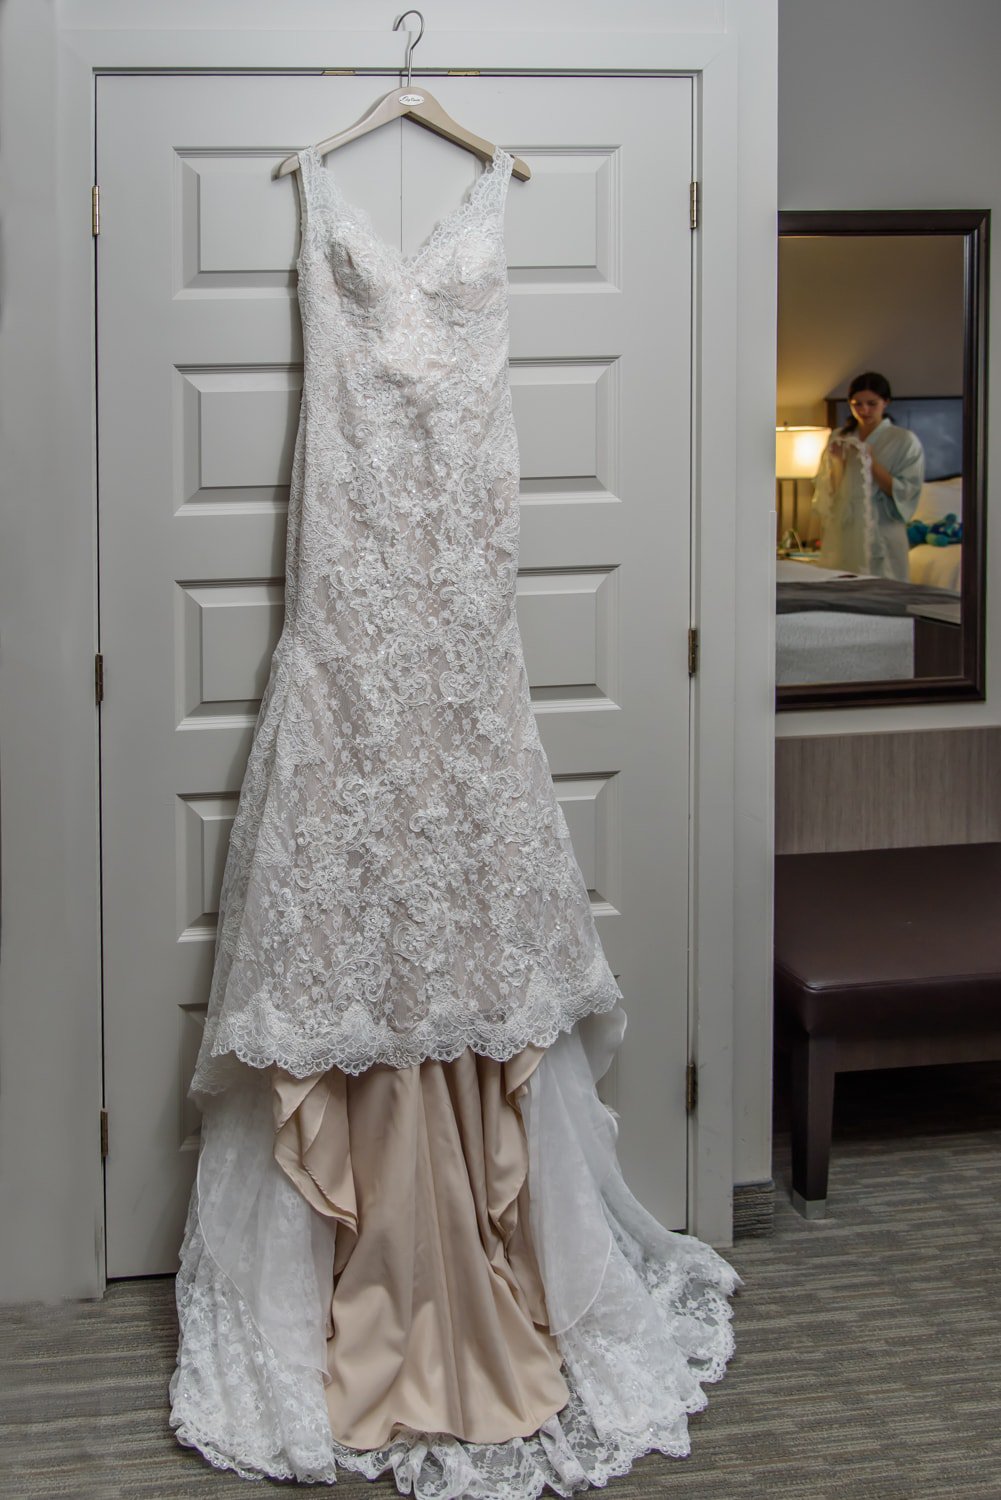 The bride's lace wedding gown for a wedding in Halifax NS.